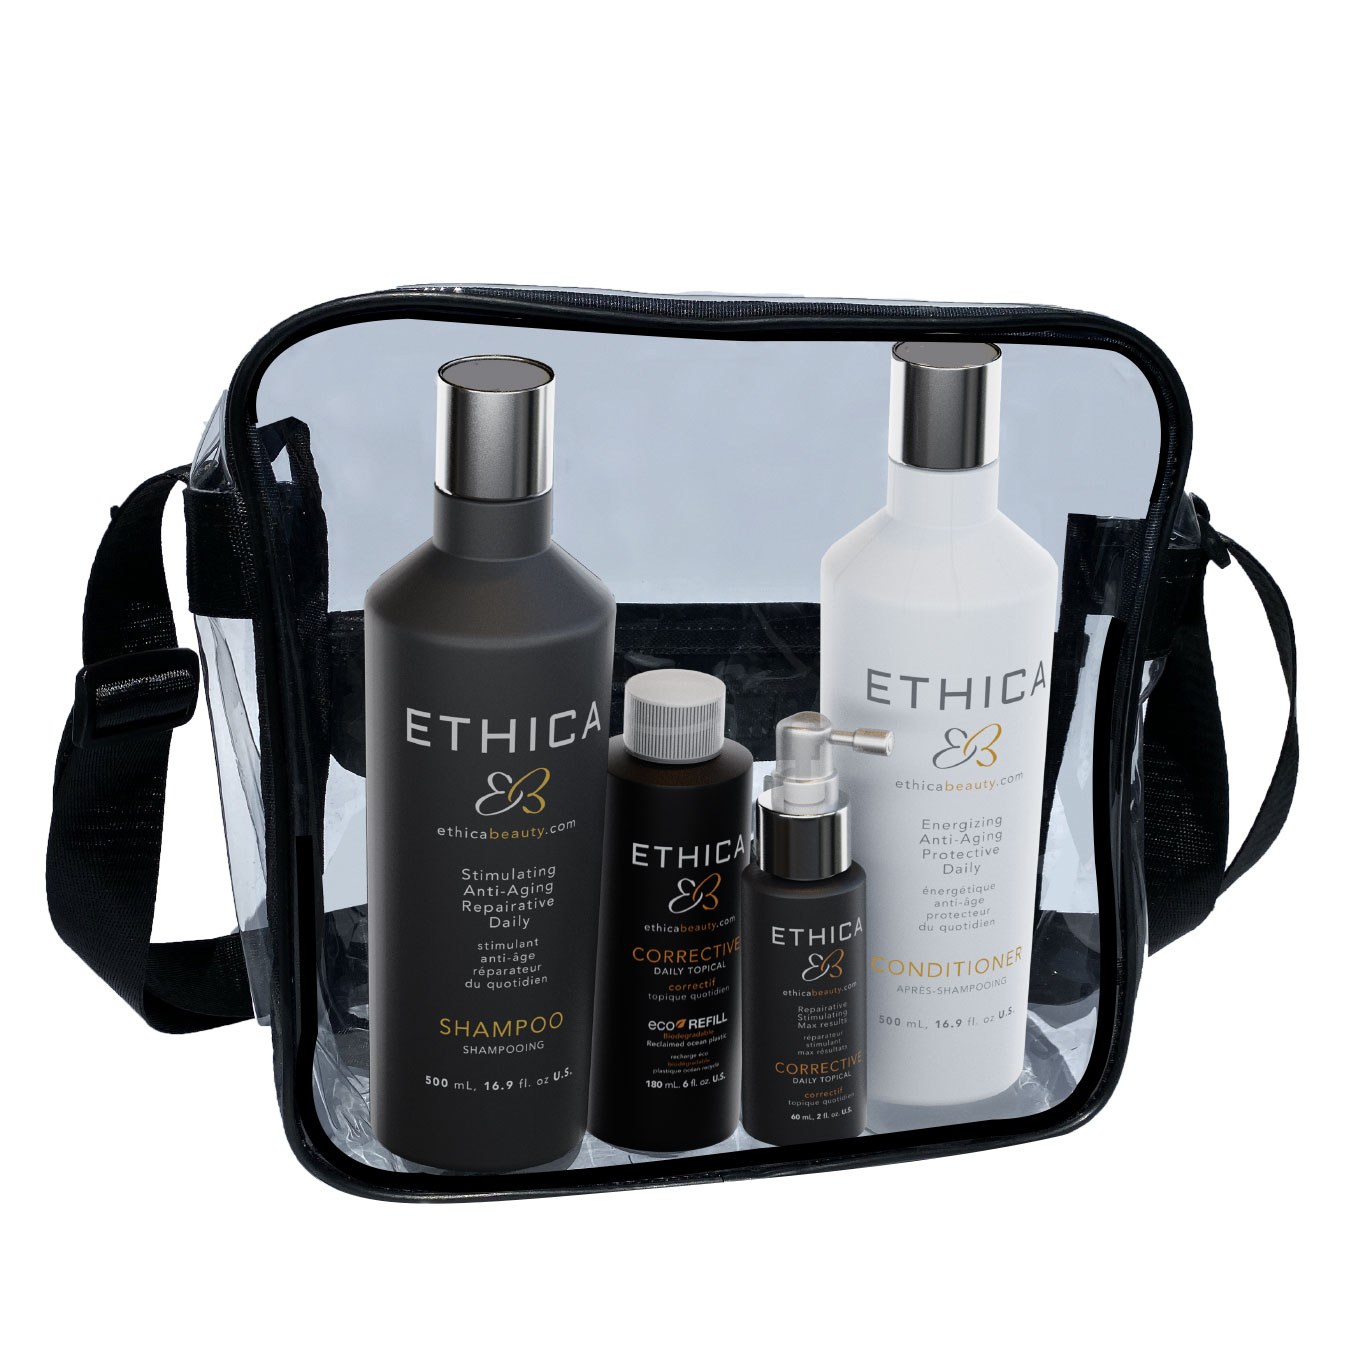 Ethica Corrective 4 Month 4pc "Addicted" Pack